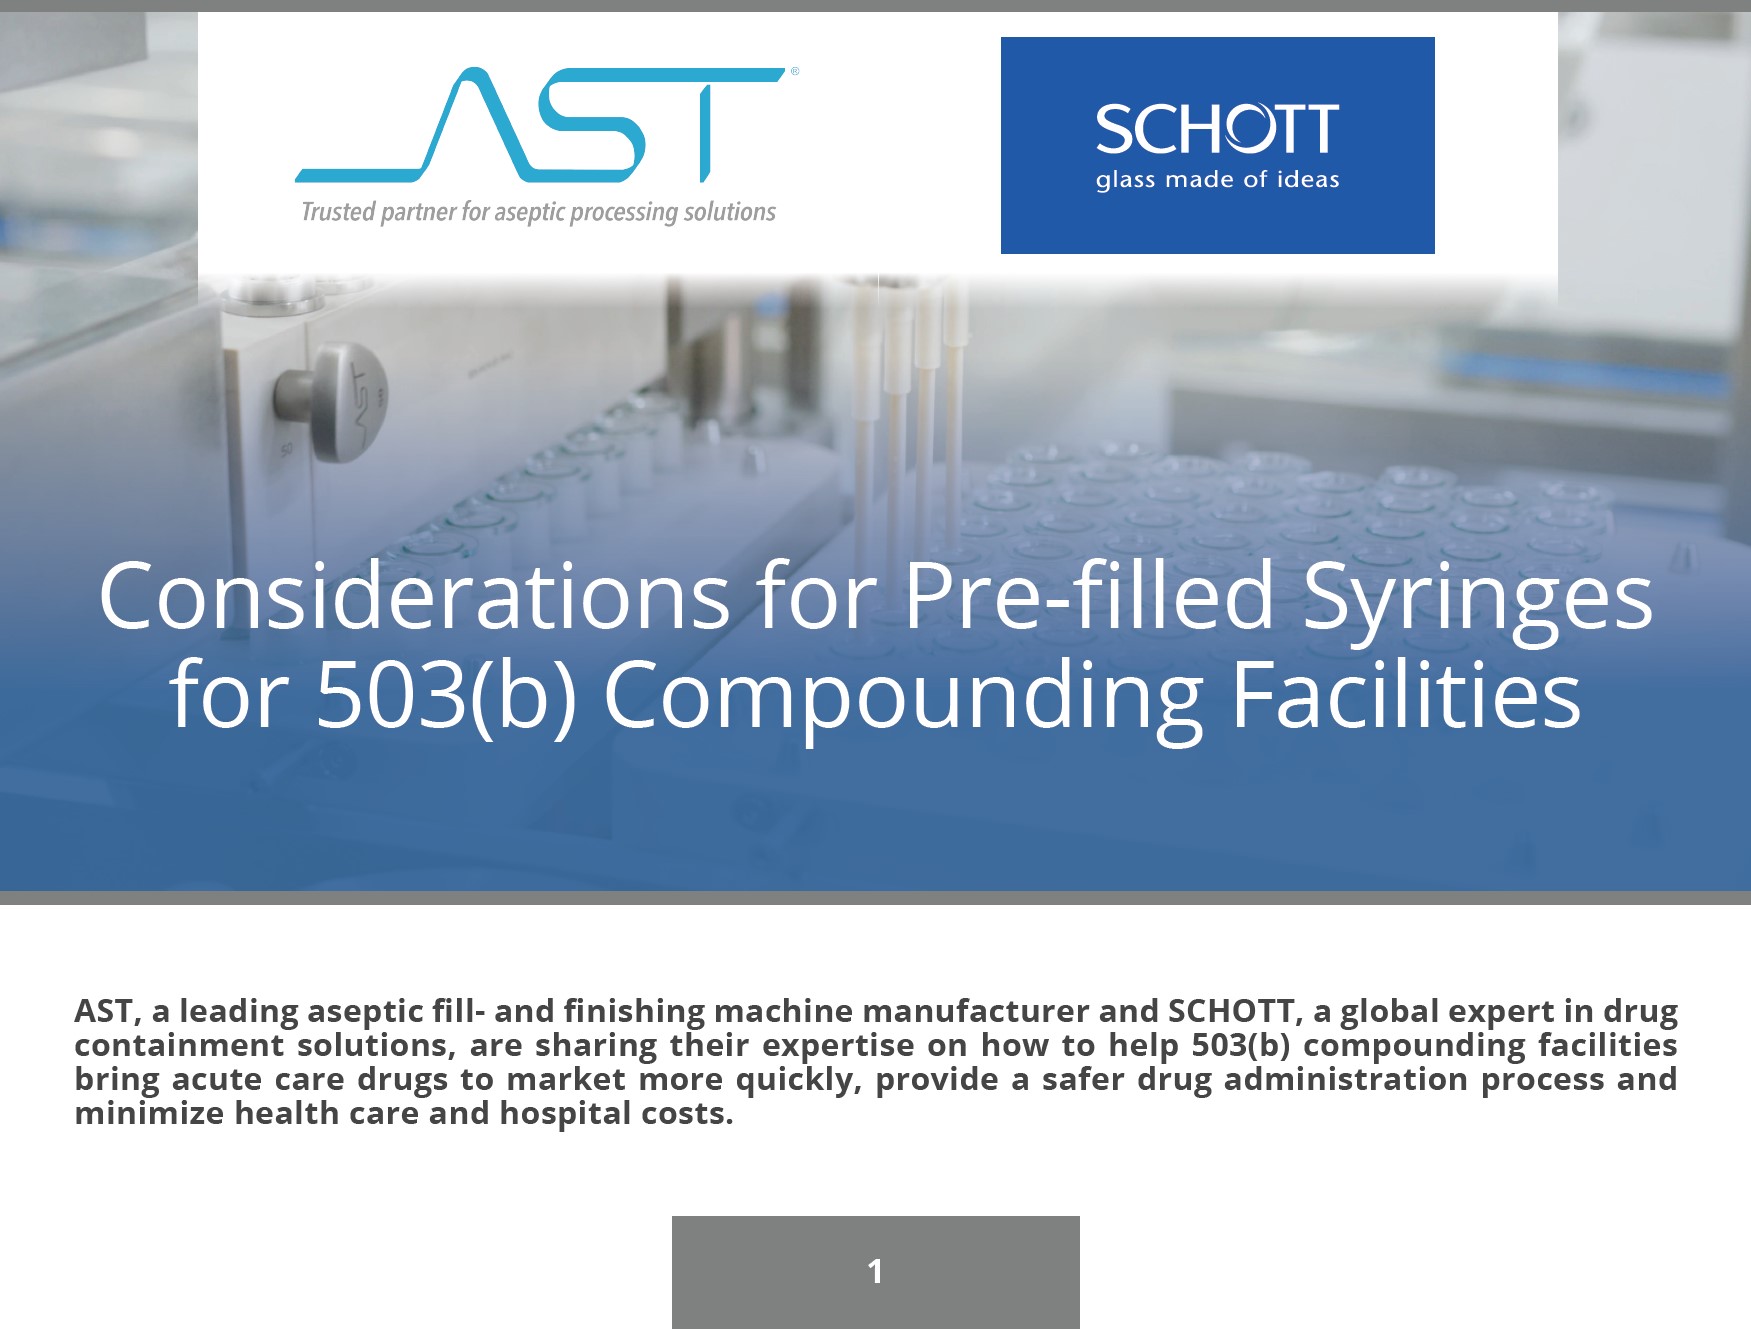 Considerations for Pre-filled Syringes for 503(b) Compounding Facilities